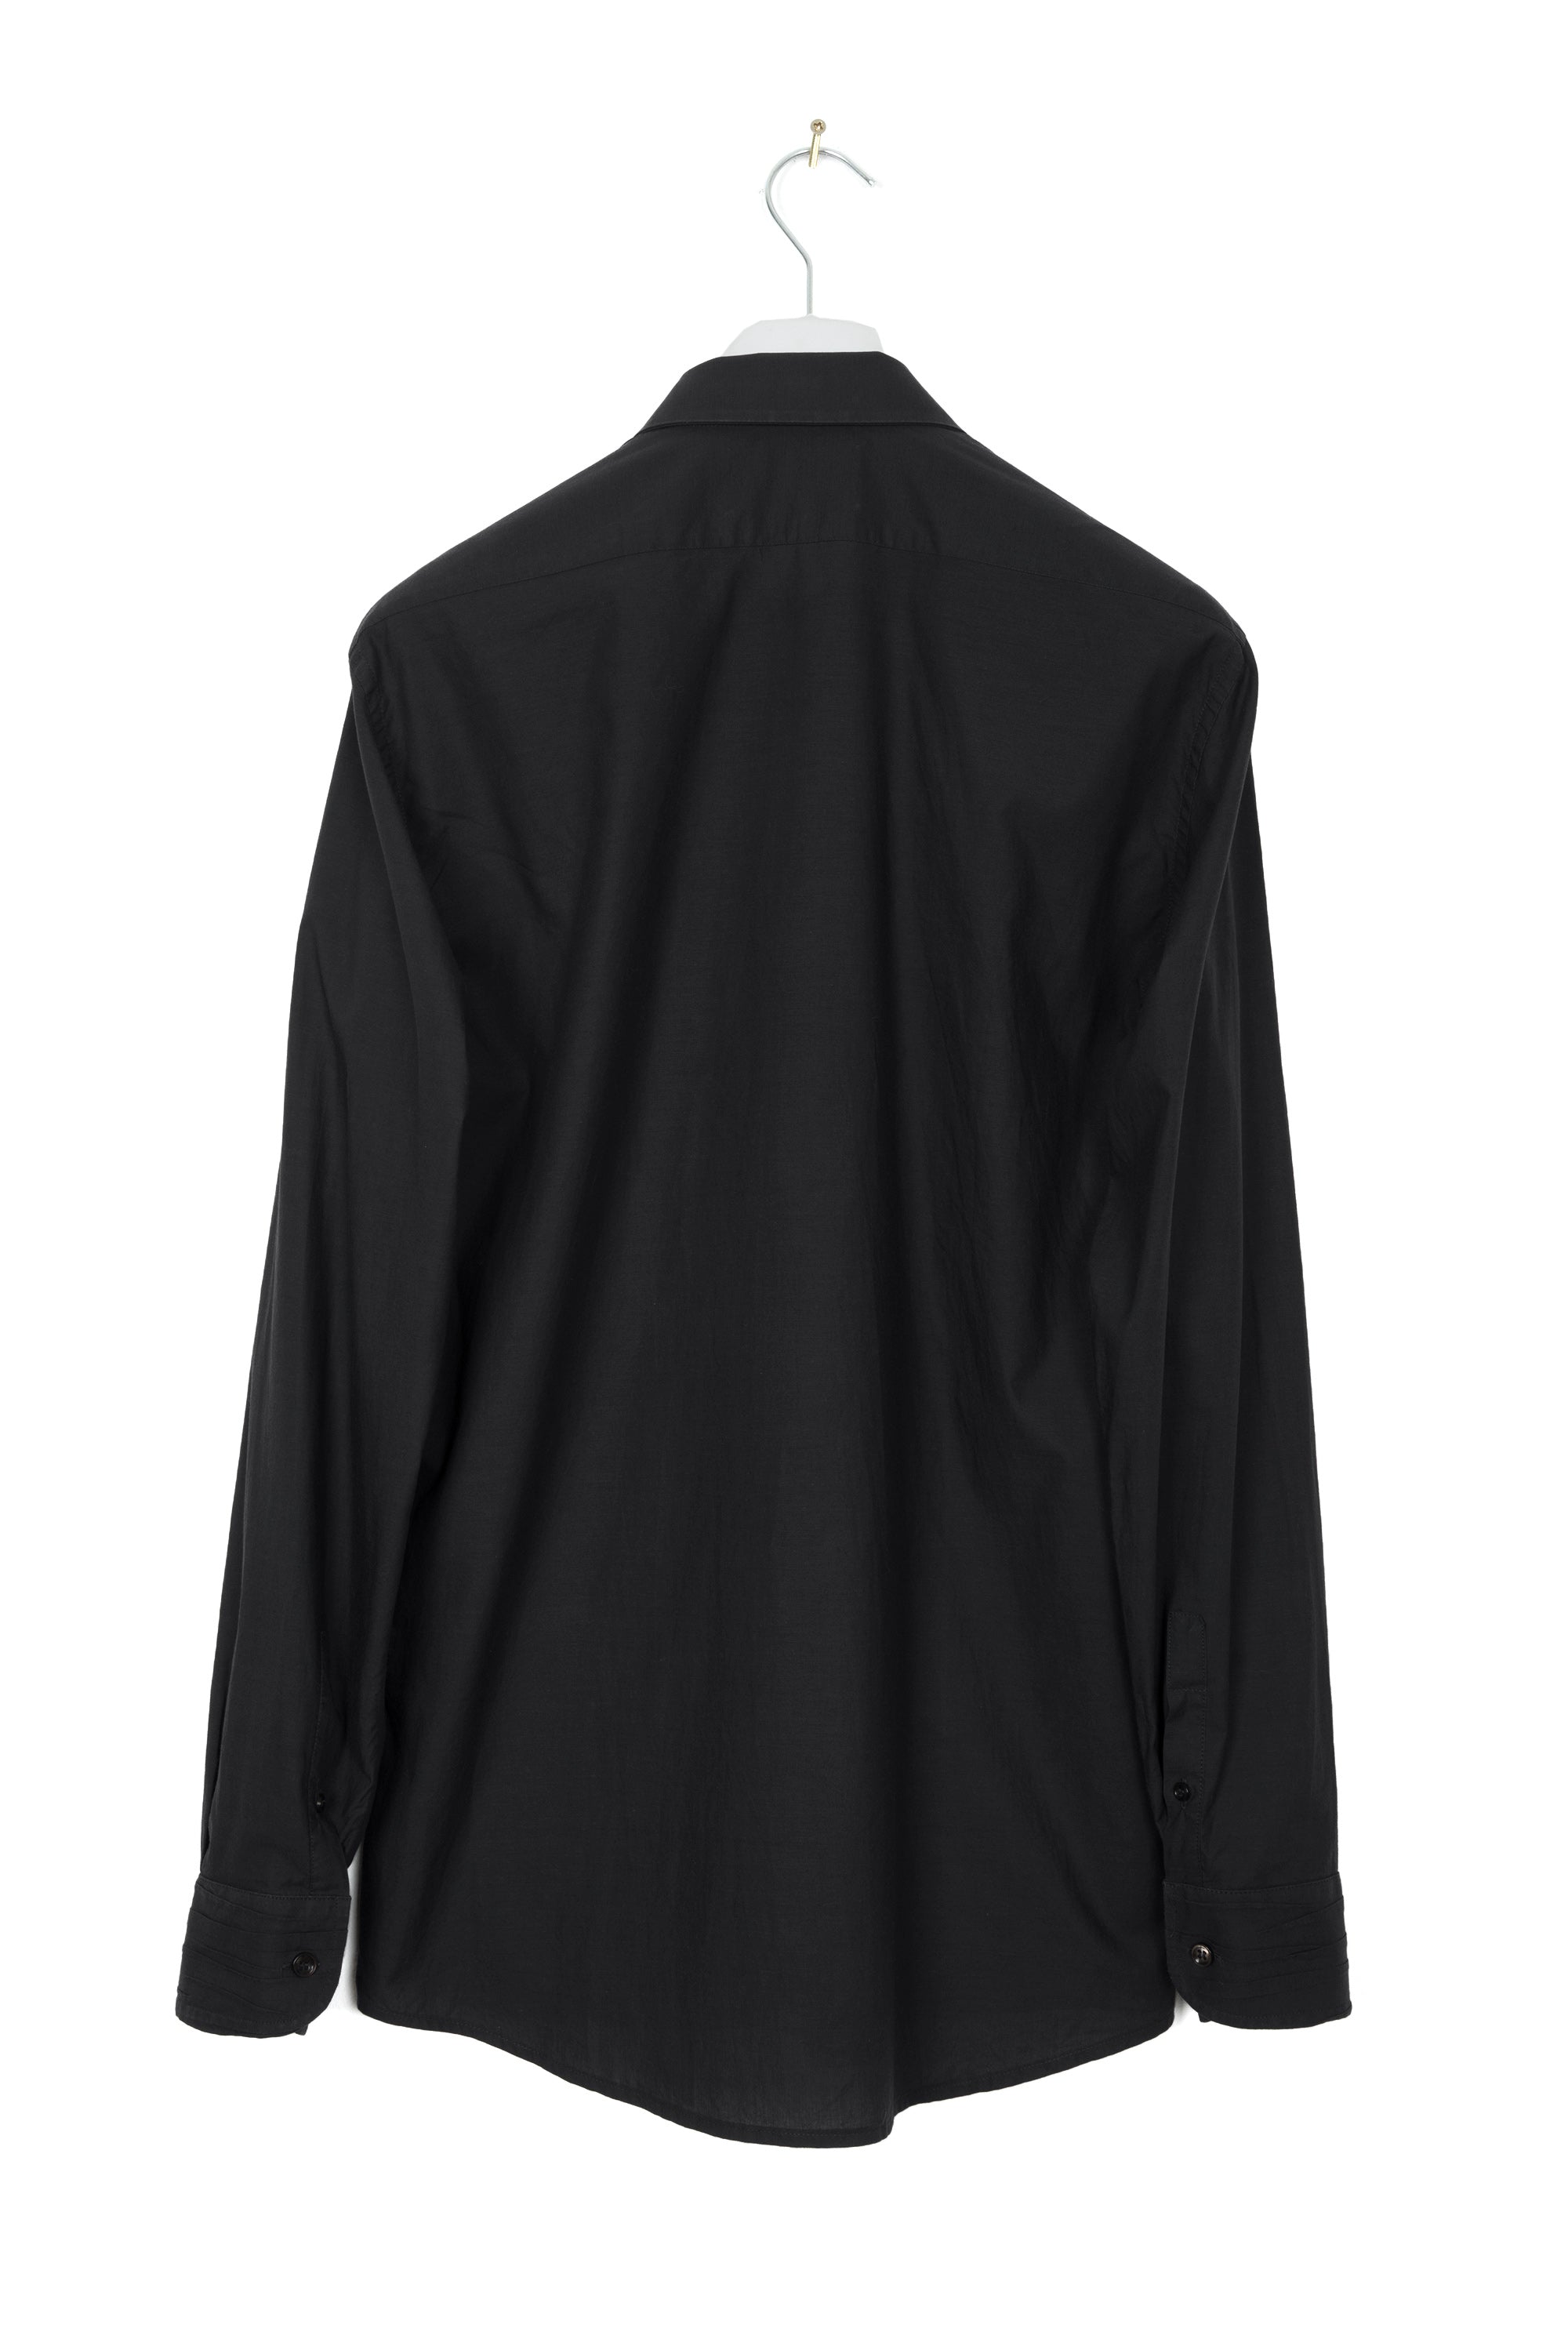 2005 A/W BLACK SHIRT WITH EXCESS FABRIC DETAIL